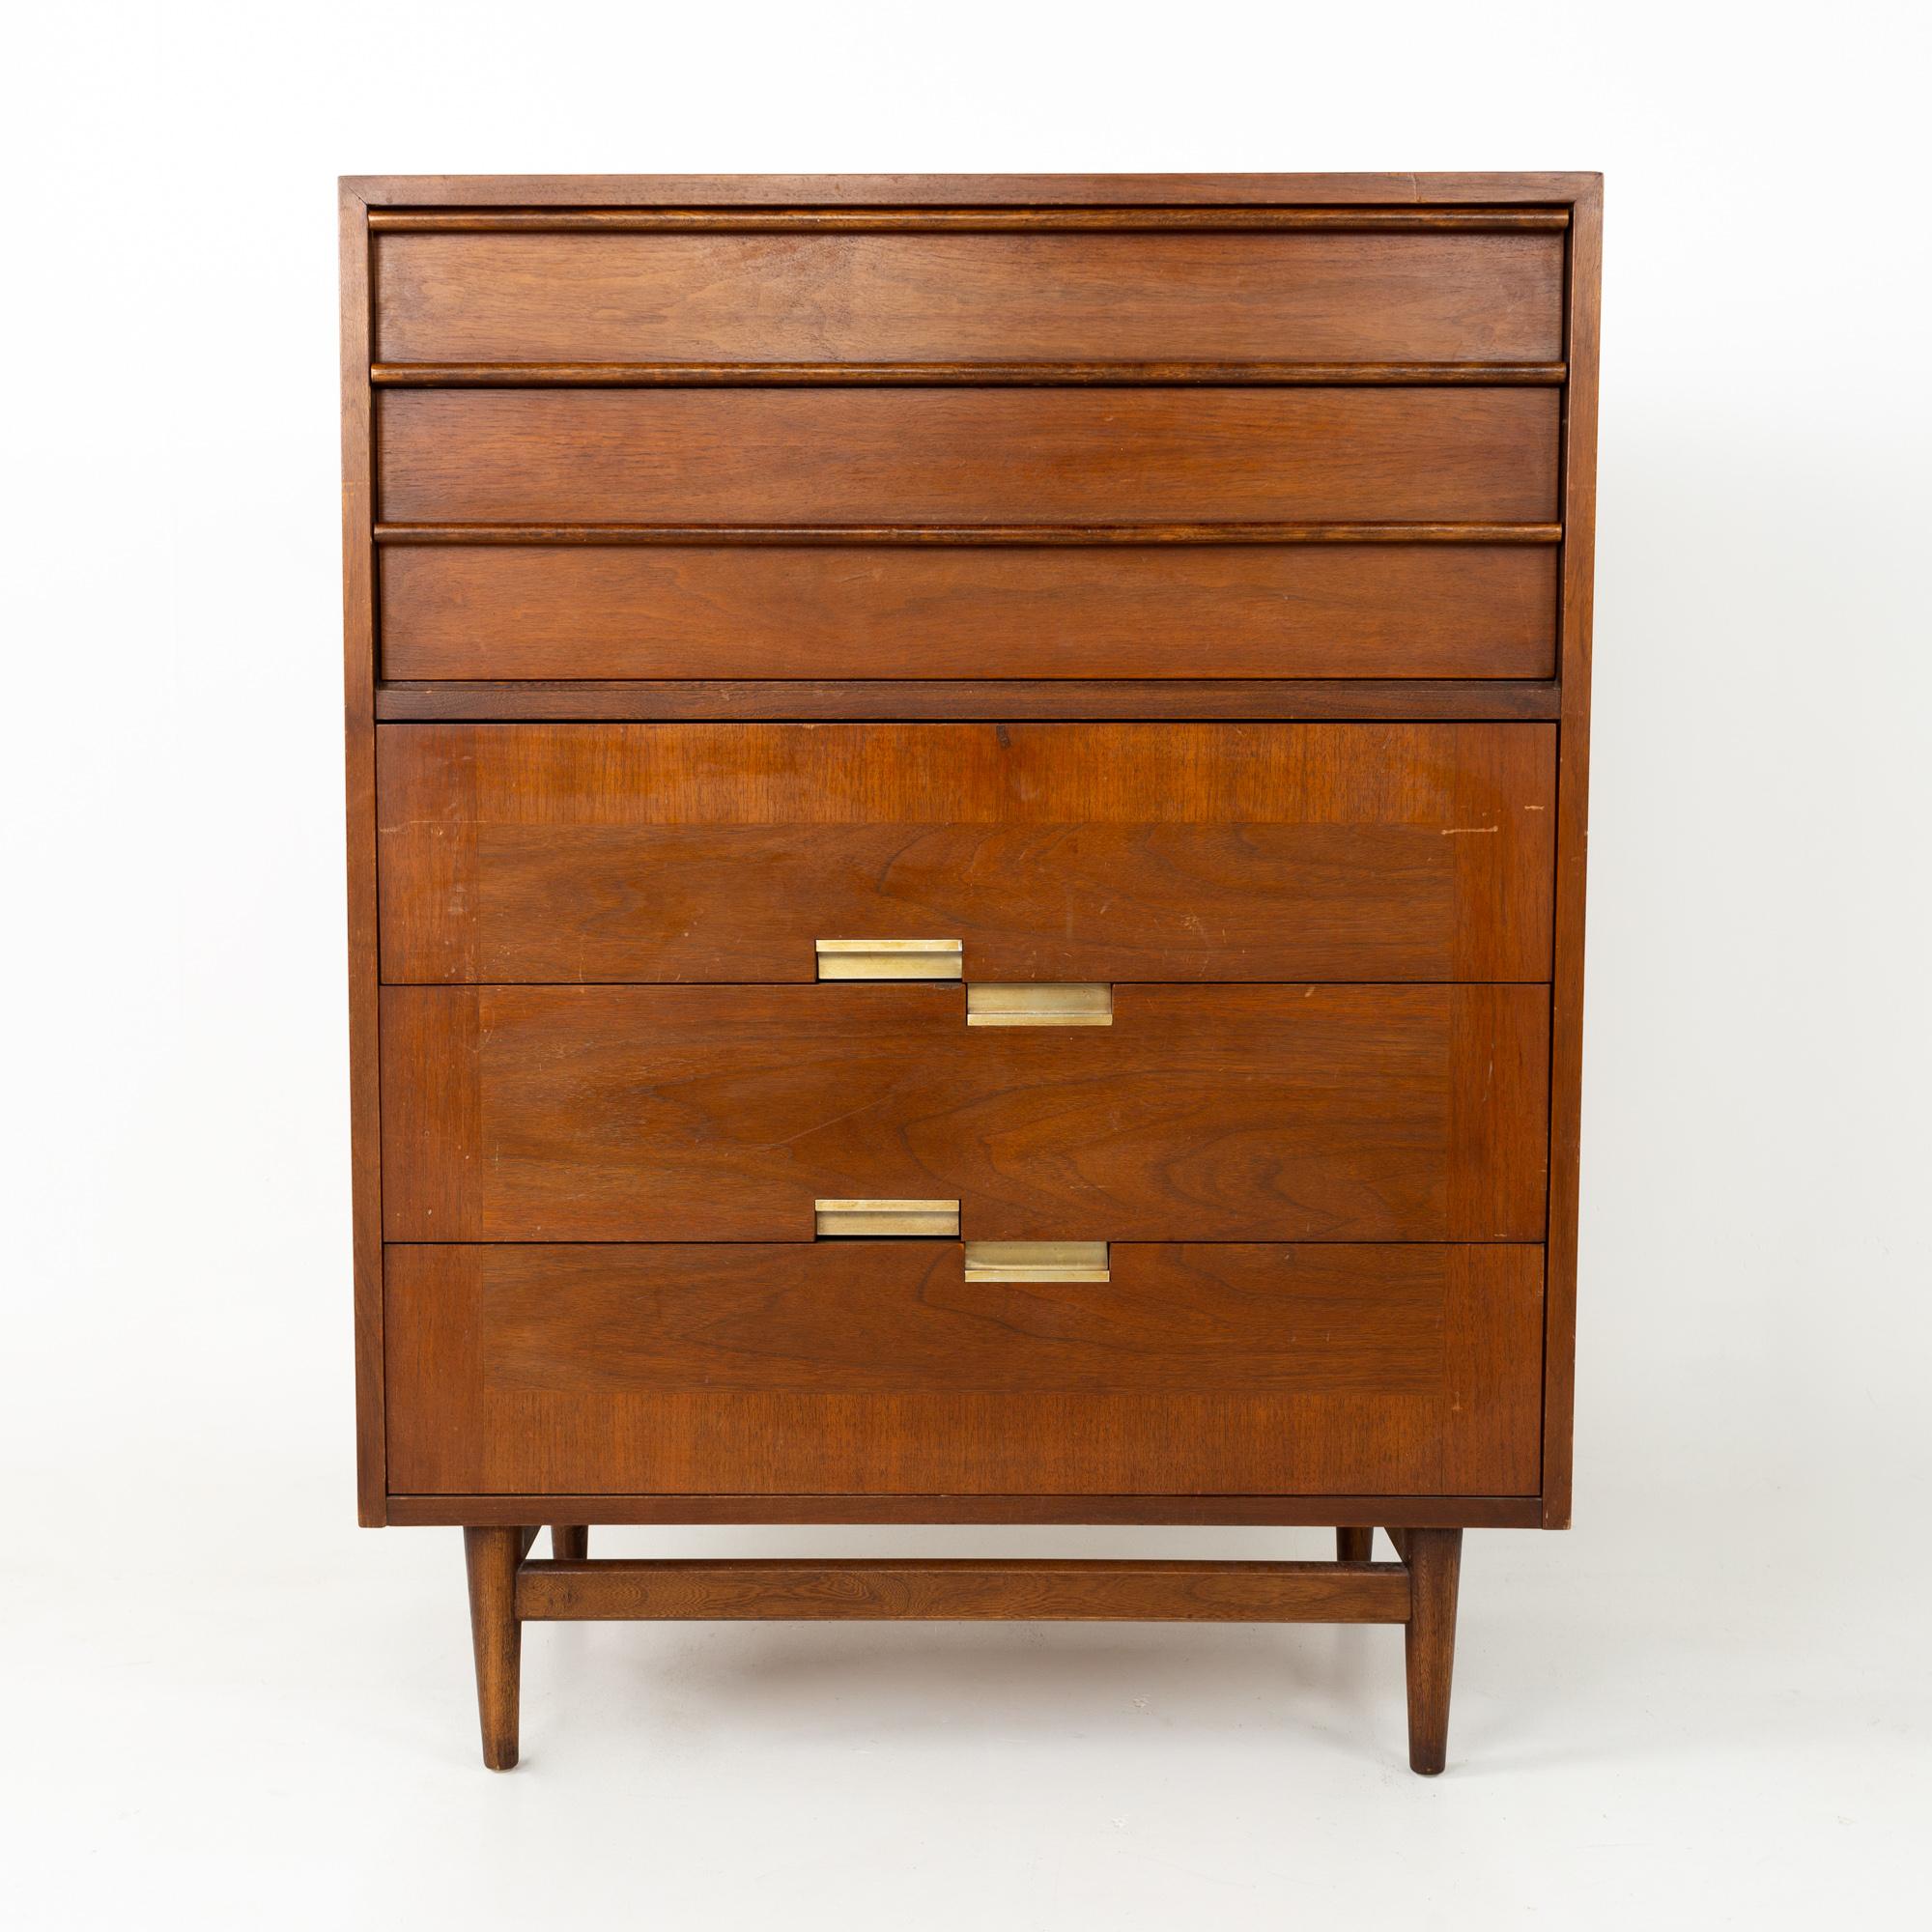 Merton Gershun for American of Martinsville Mid Century walnut highboy dresser
This dresser is 34 wide x 18.5 deep x 44.75 inches high

This price includes getting this piece in what we call restored vintage condition. That means the piece is